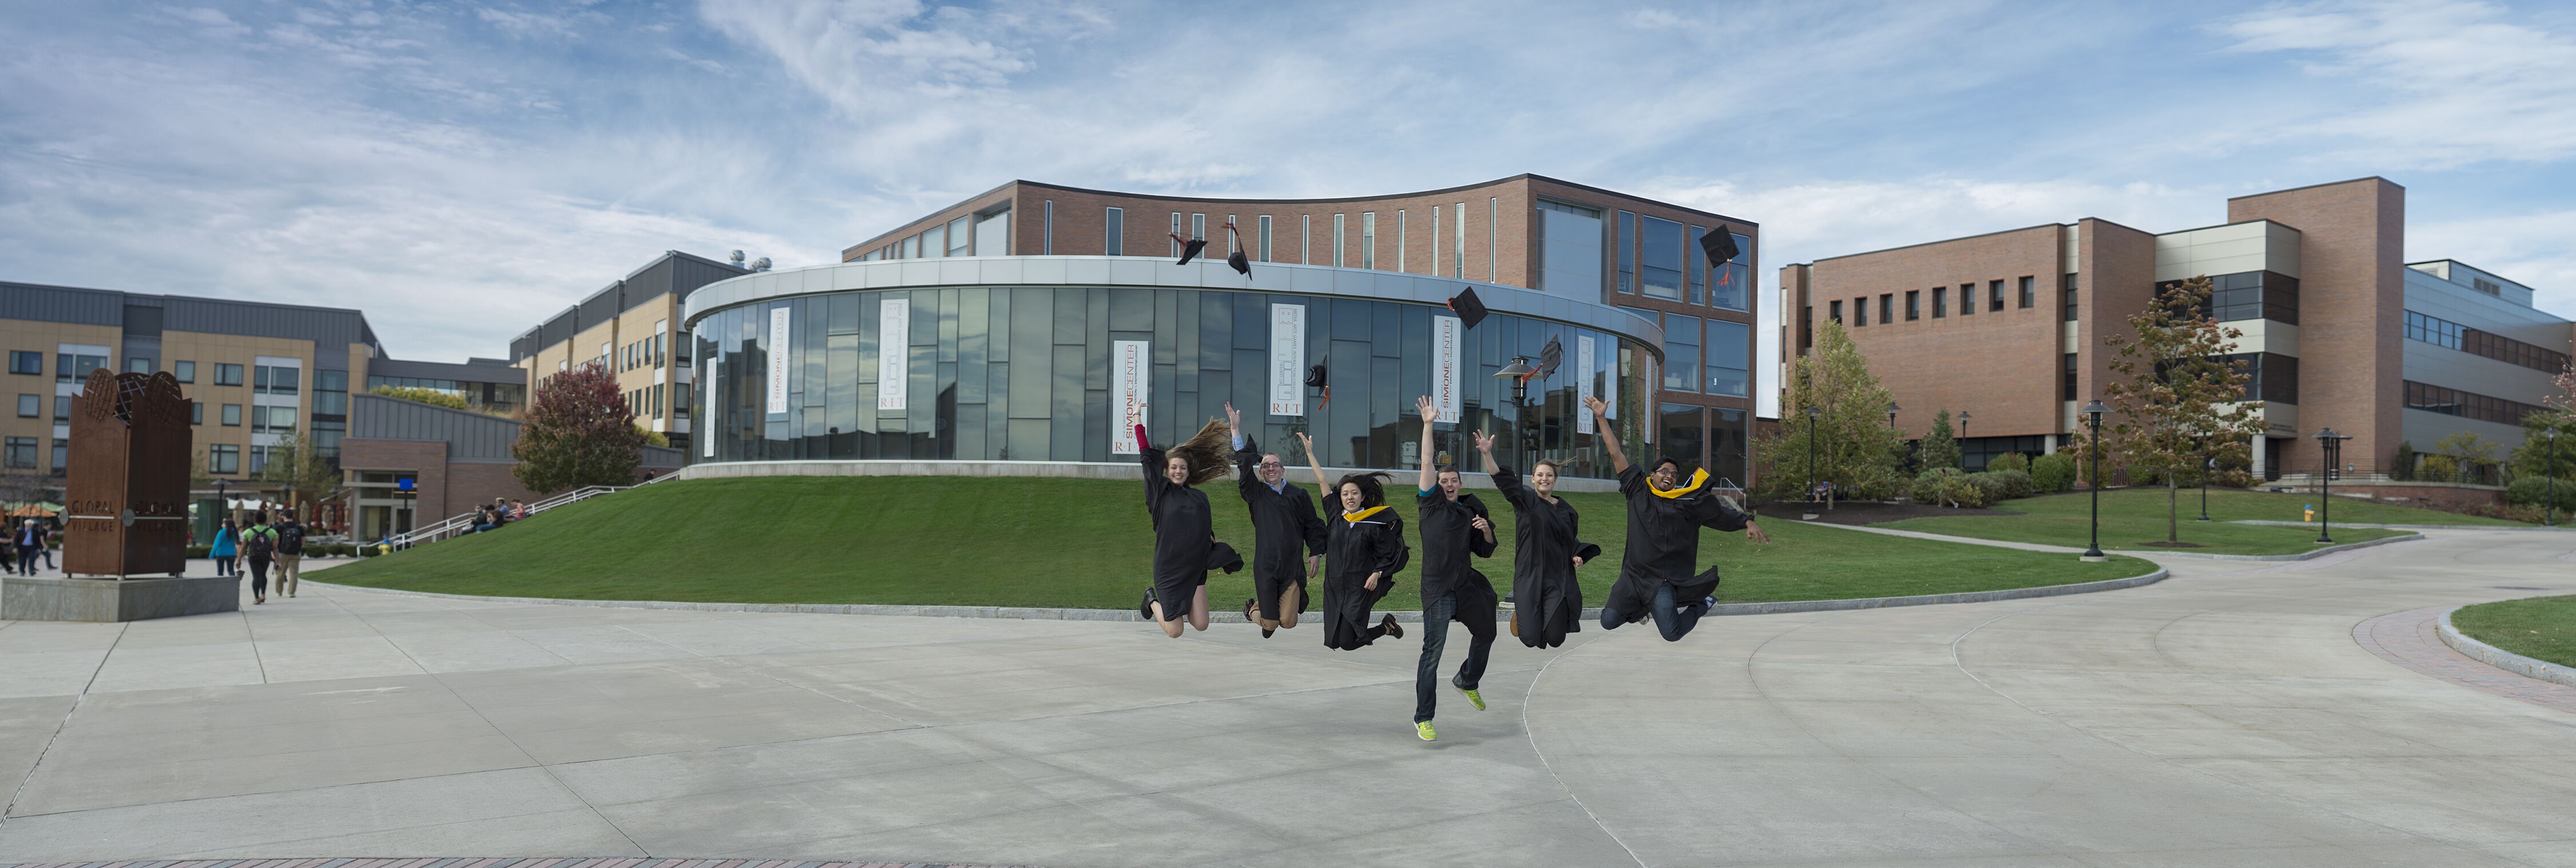 Students in caps and gowns jumping in air on campus